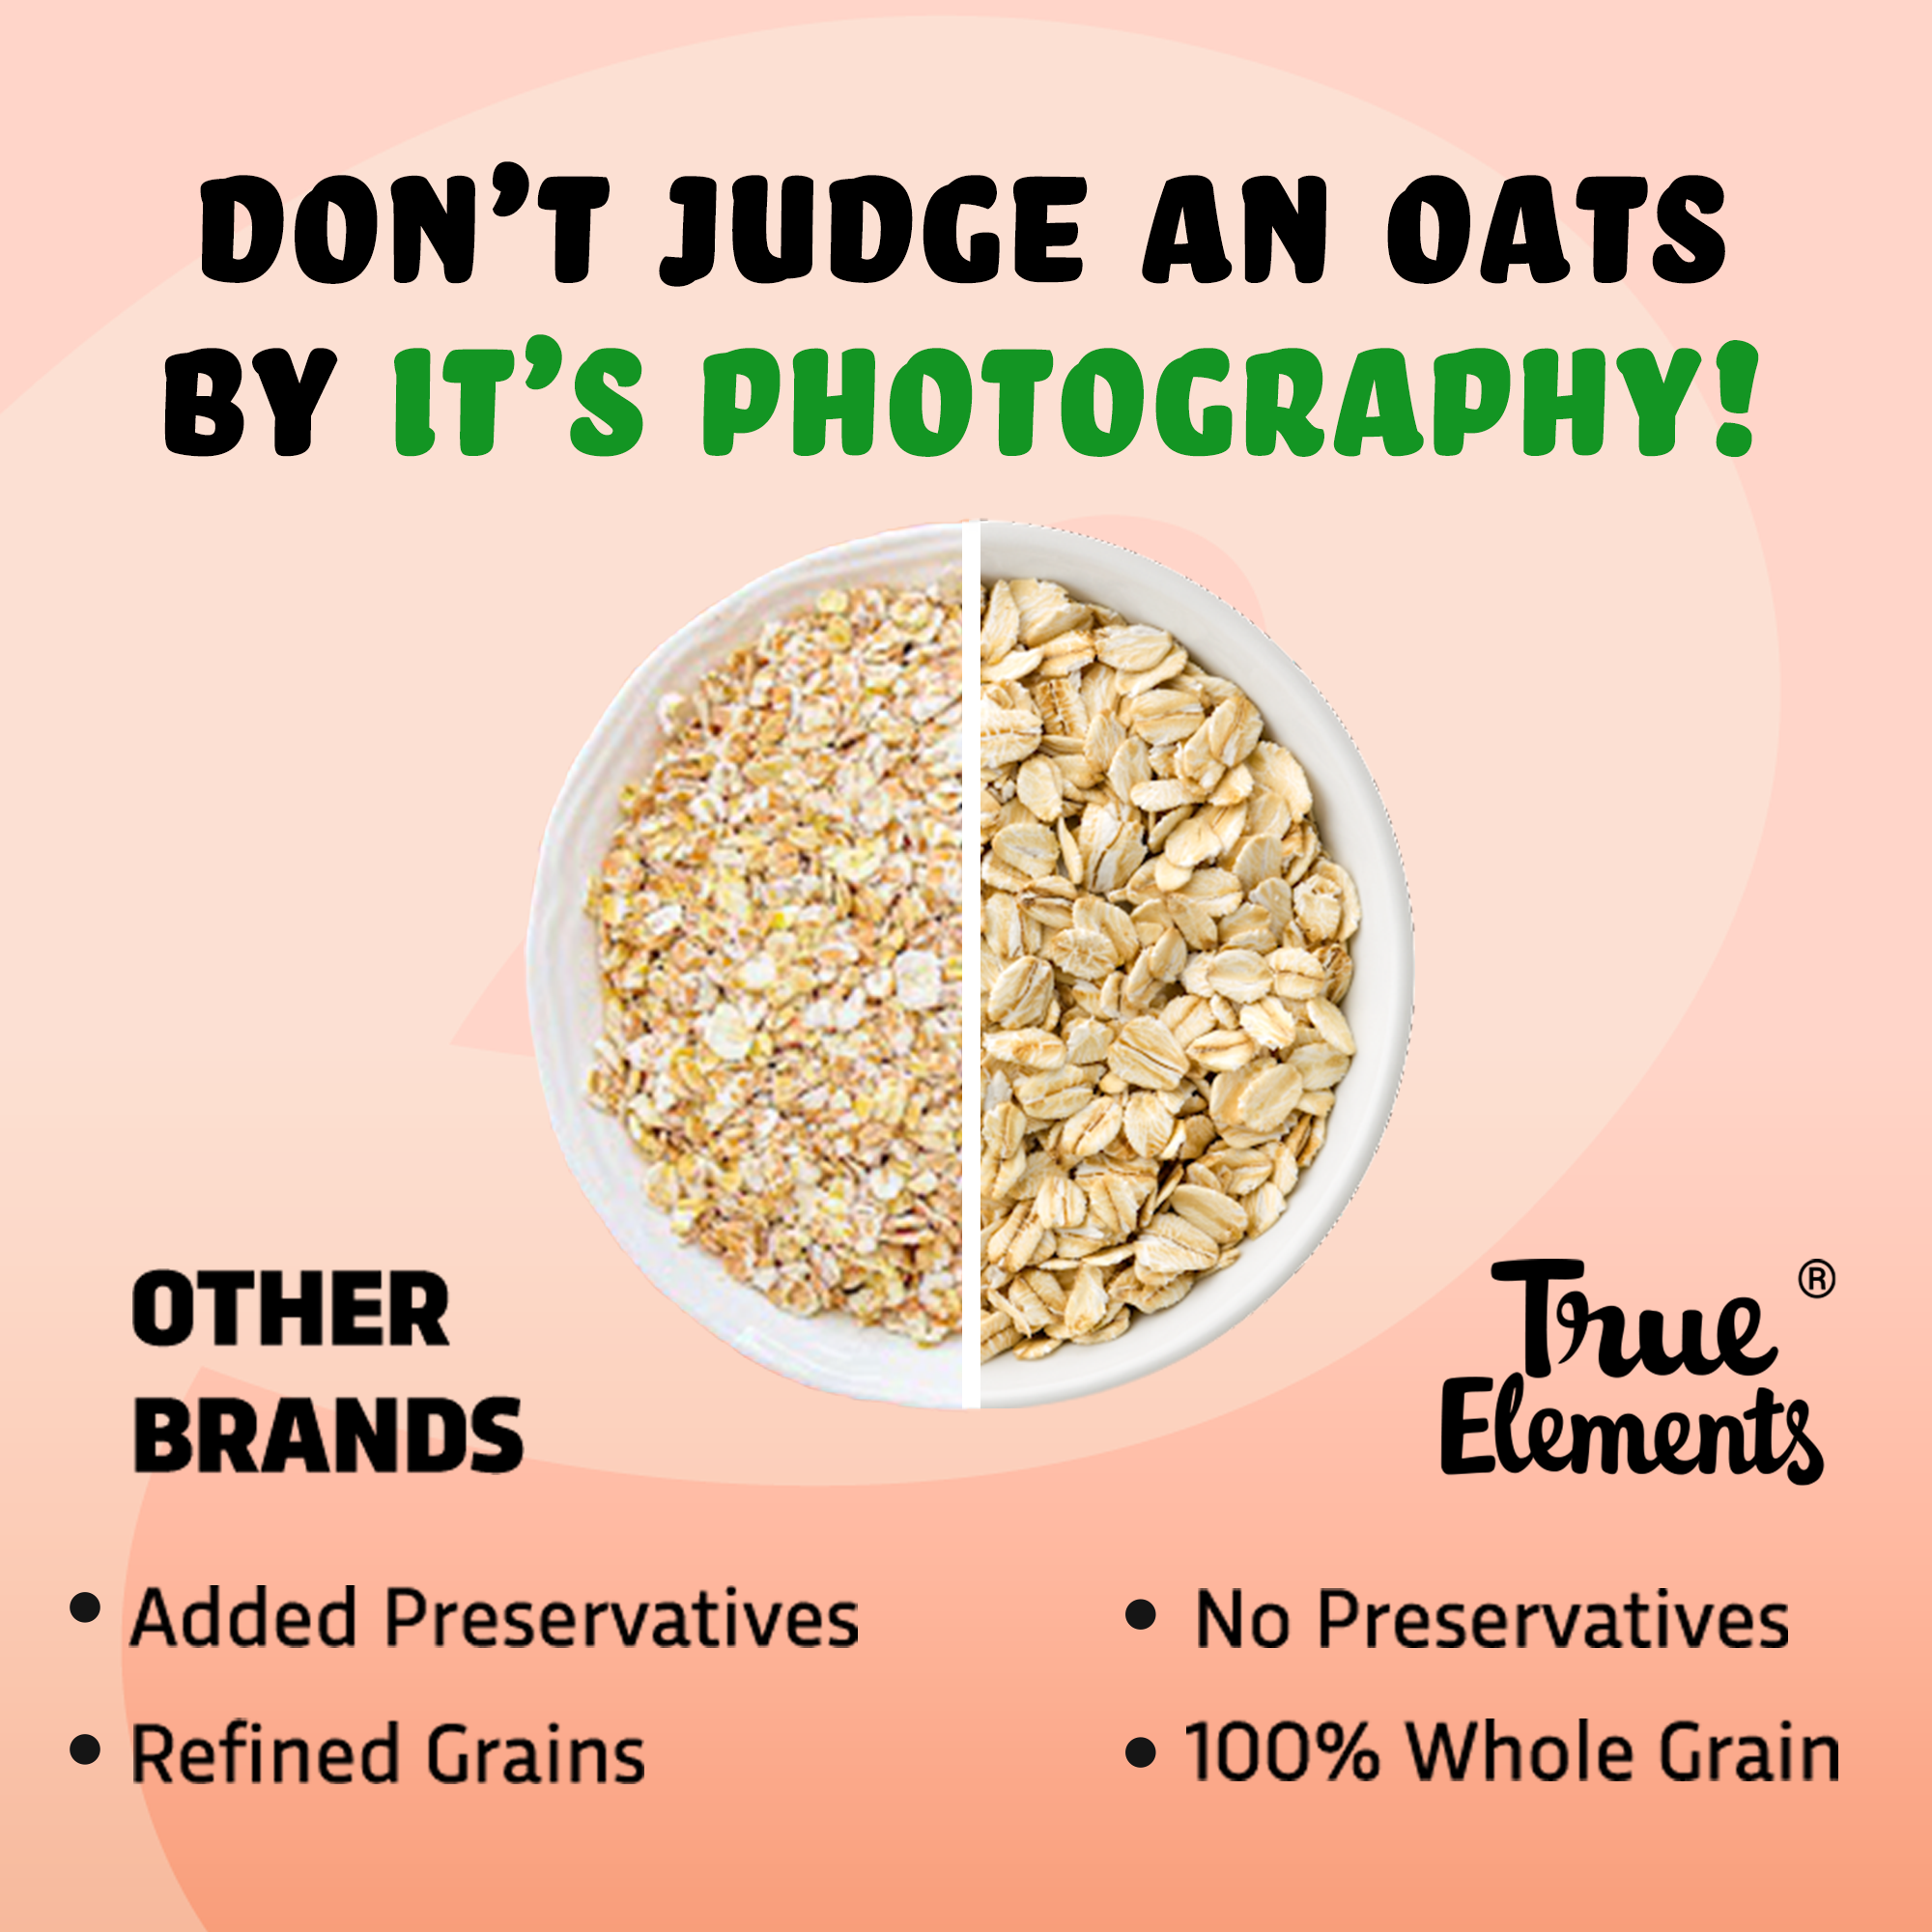 True elements rolled oats has no preservatives and is 100% whole grain.